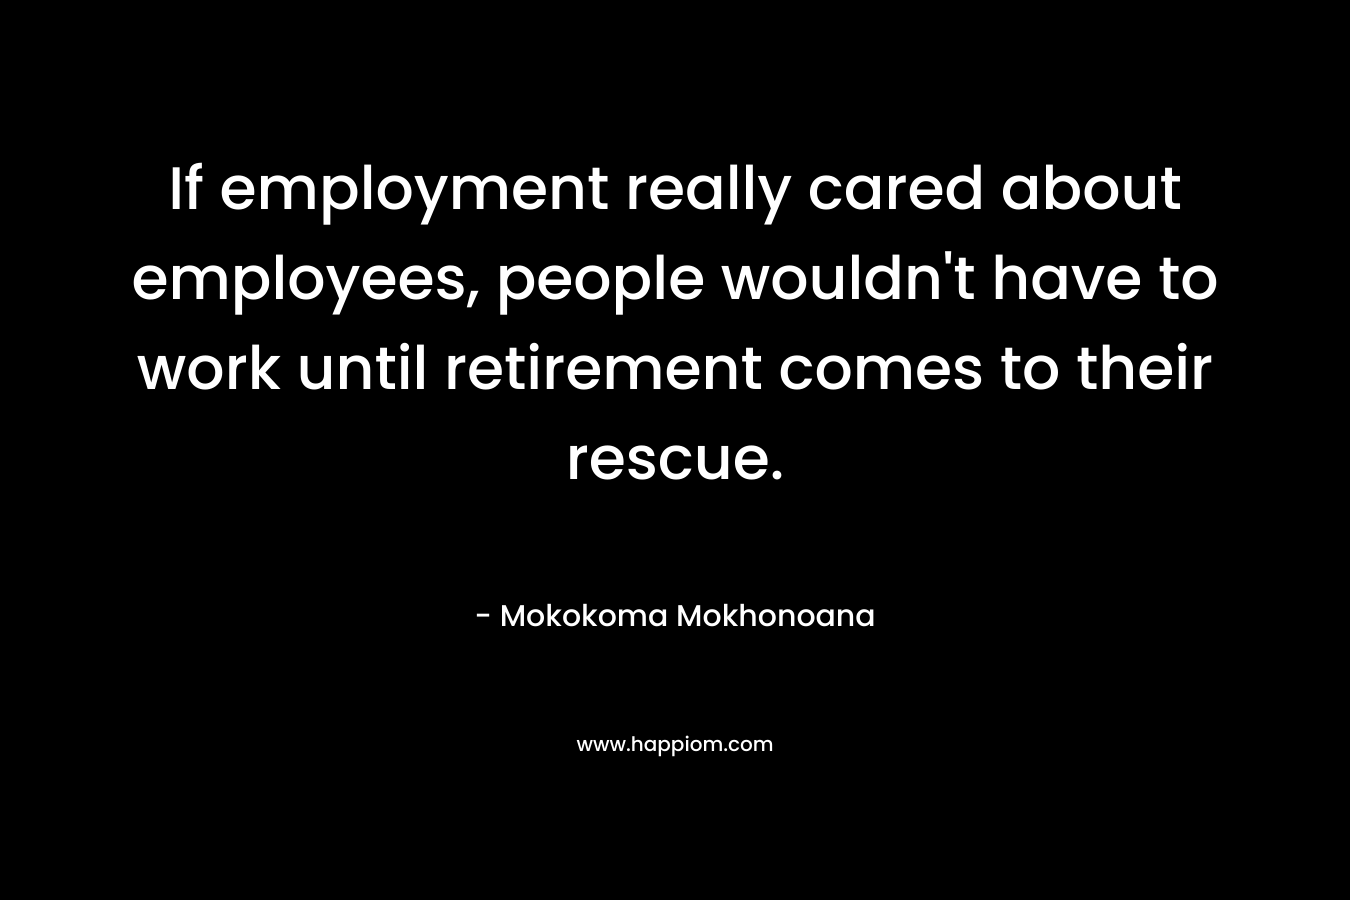 If employment really cared about employees, people wouldn't have to work until retirement comes to their rescue.